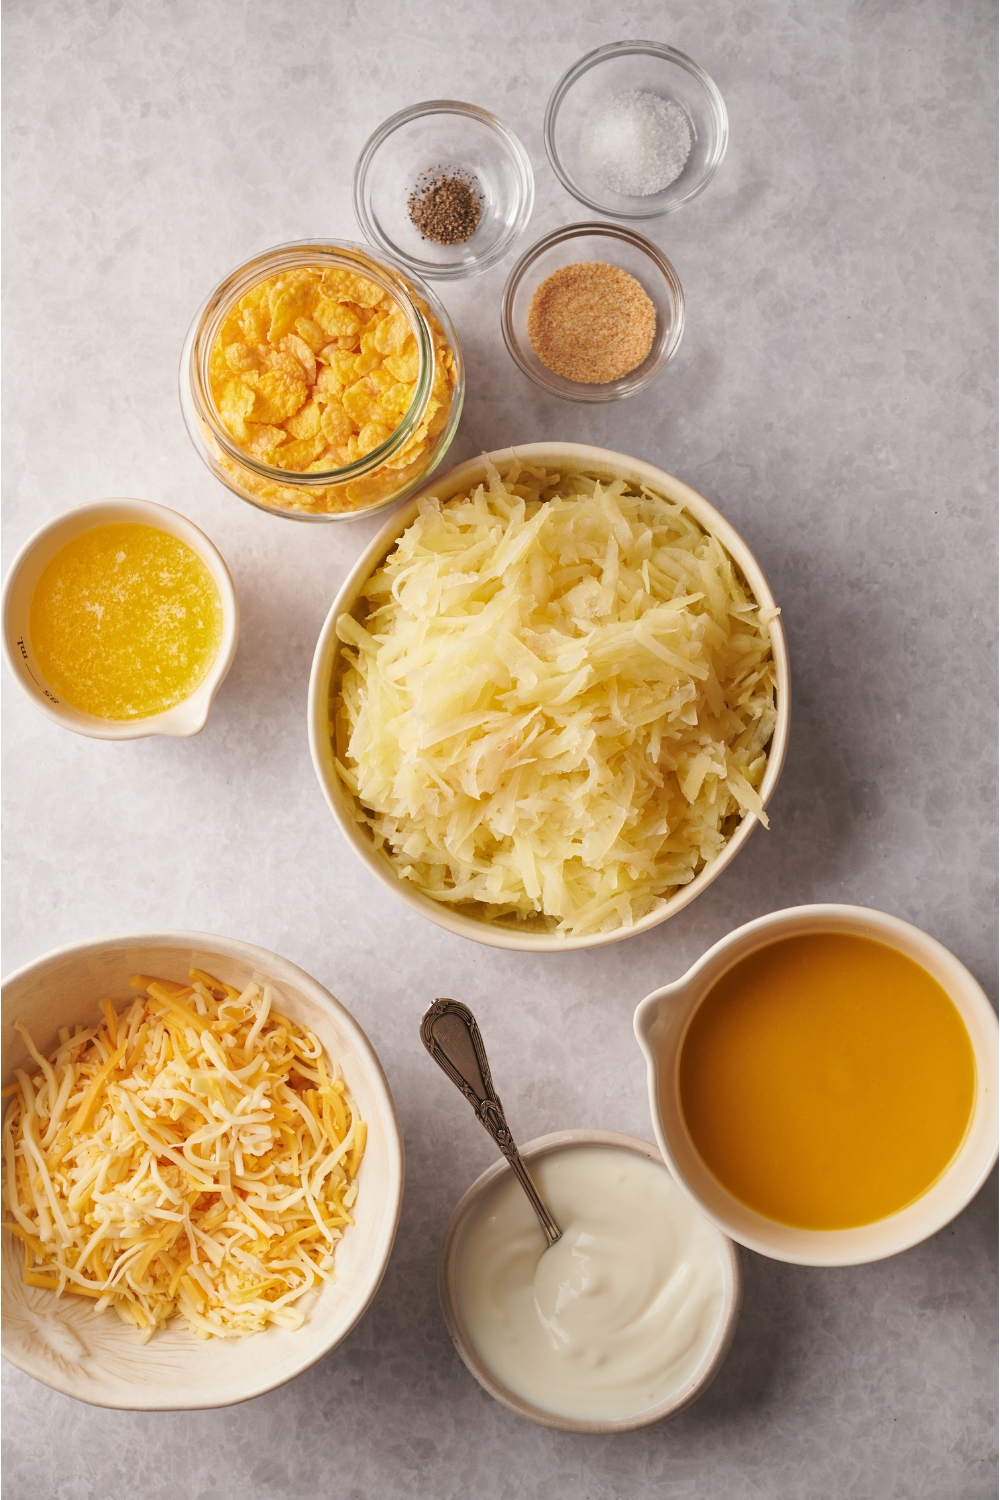 A countertop with hashbrowns, shredded cheese, broth, condensed soup, melted butter, corn flakes and seasonings in various bowls.